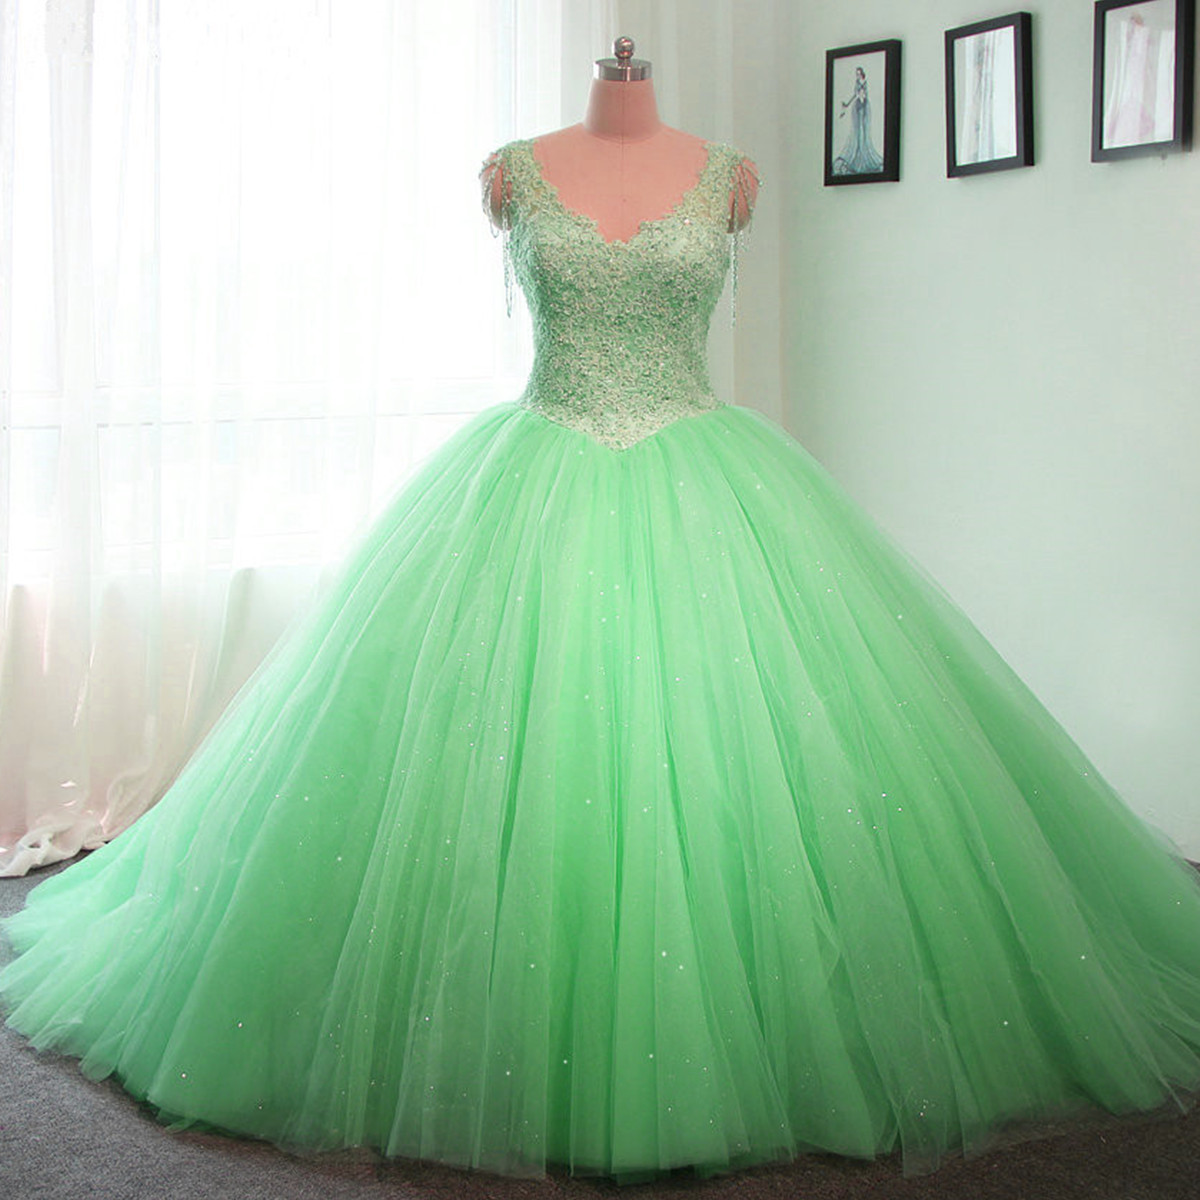 V Neck Wedding Gowns,lace Appliques Wedding Dress,ball Gowns Wedding Dresses,lime Green Quinceanera Dresses